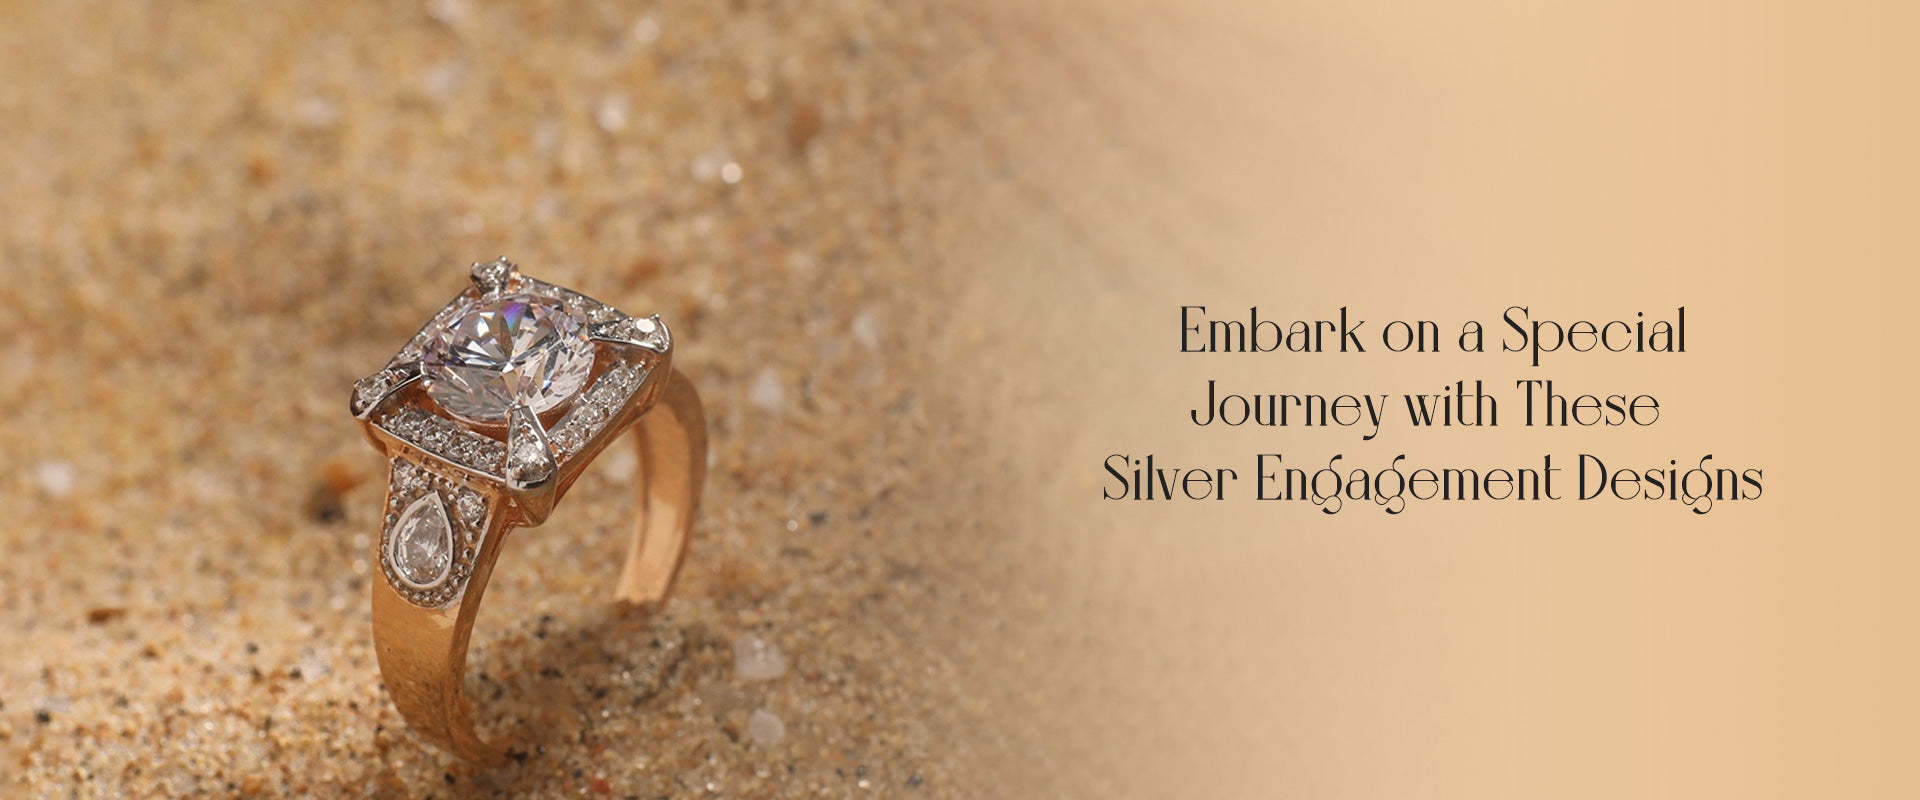 Embark on a Special Journey with These Silver Engagement Designs